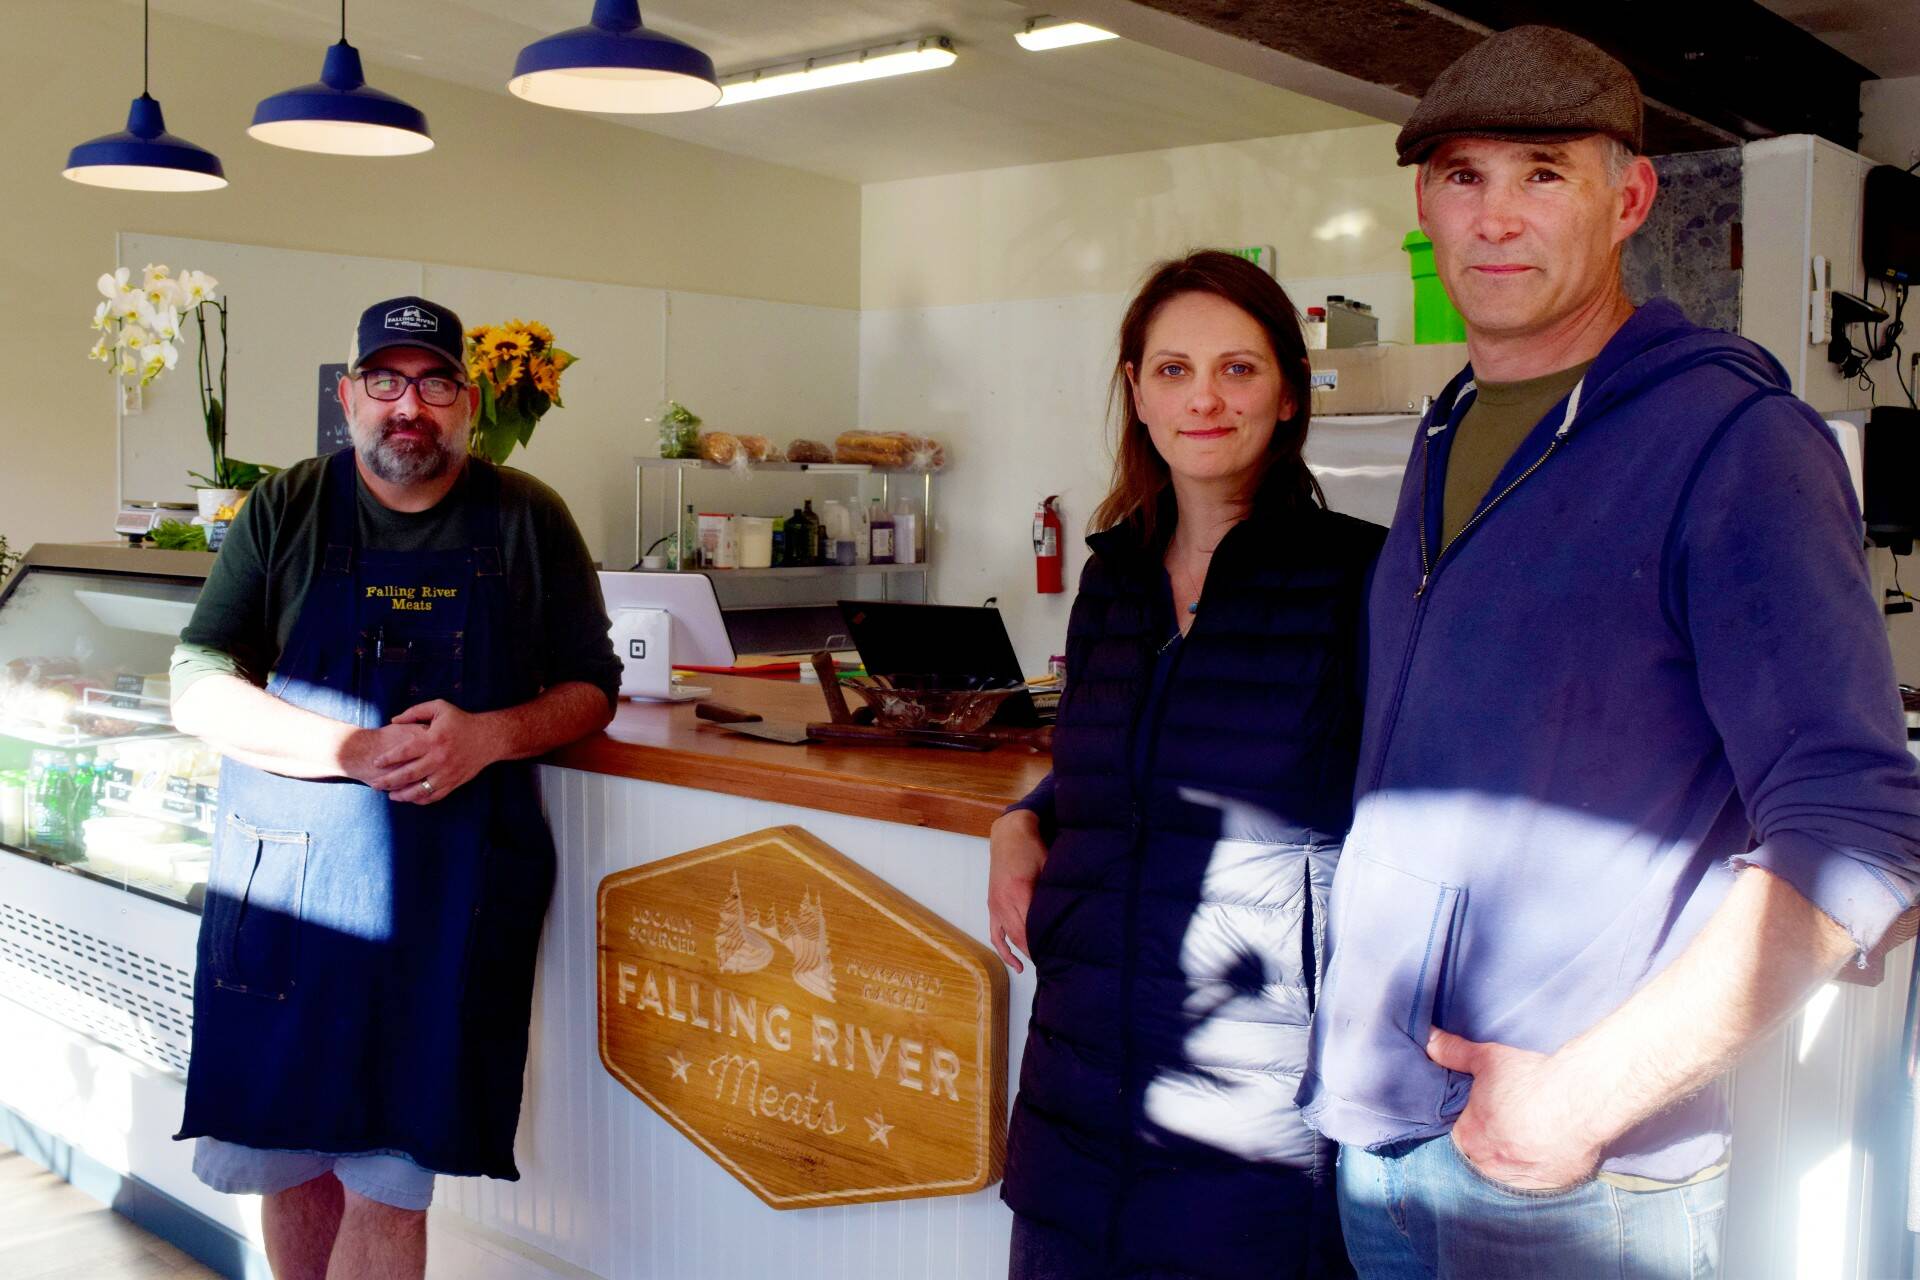 Photo Conor Wilson/Valley Record.
Darron and Christeena Mazolf (right), owners of Falling River Meats at 108 W. North Bend Way in North Bend, pose for a photo alongside Chef Justin Finch.